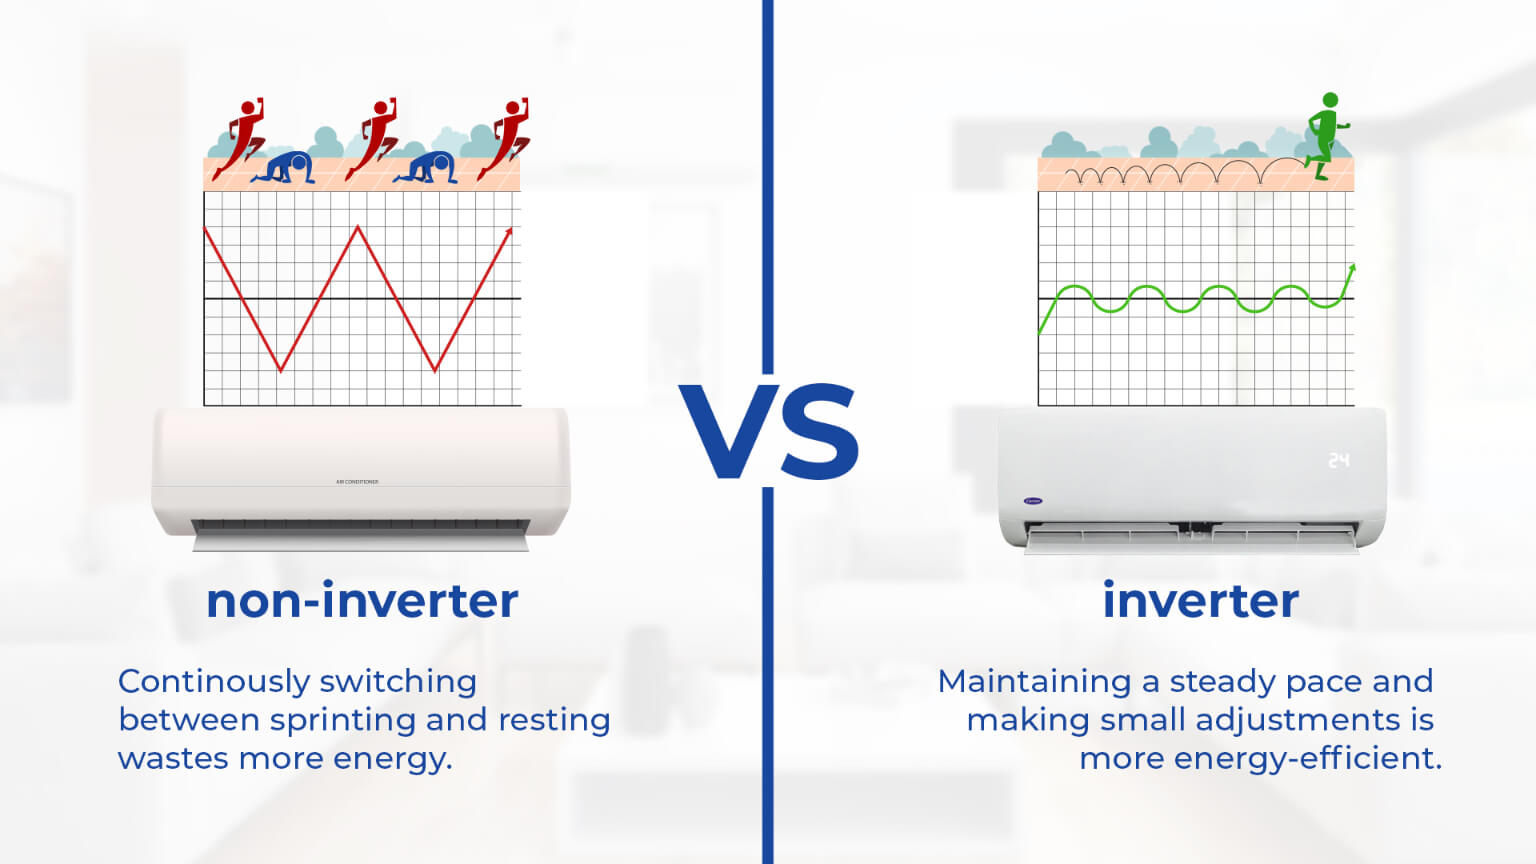 Carrier-Philippines-brief-infographic-explaining-difference-between-non-inverter-and-inverter-aircon